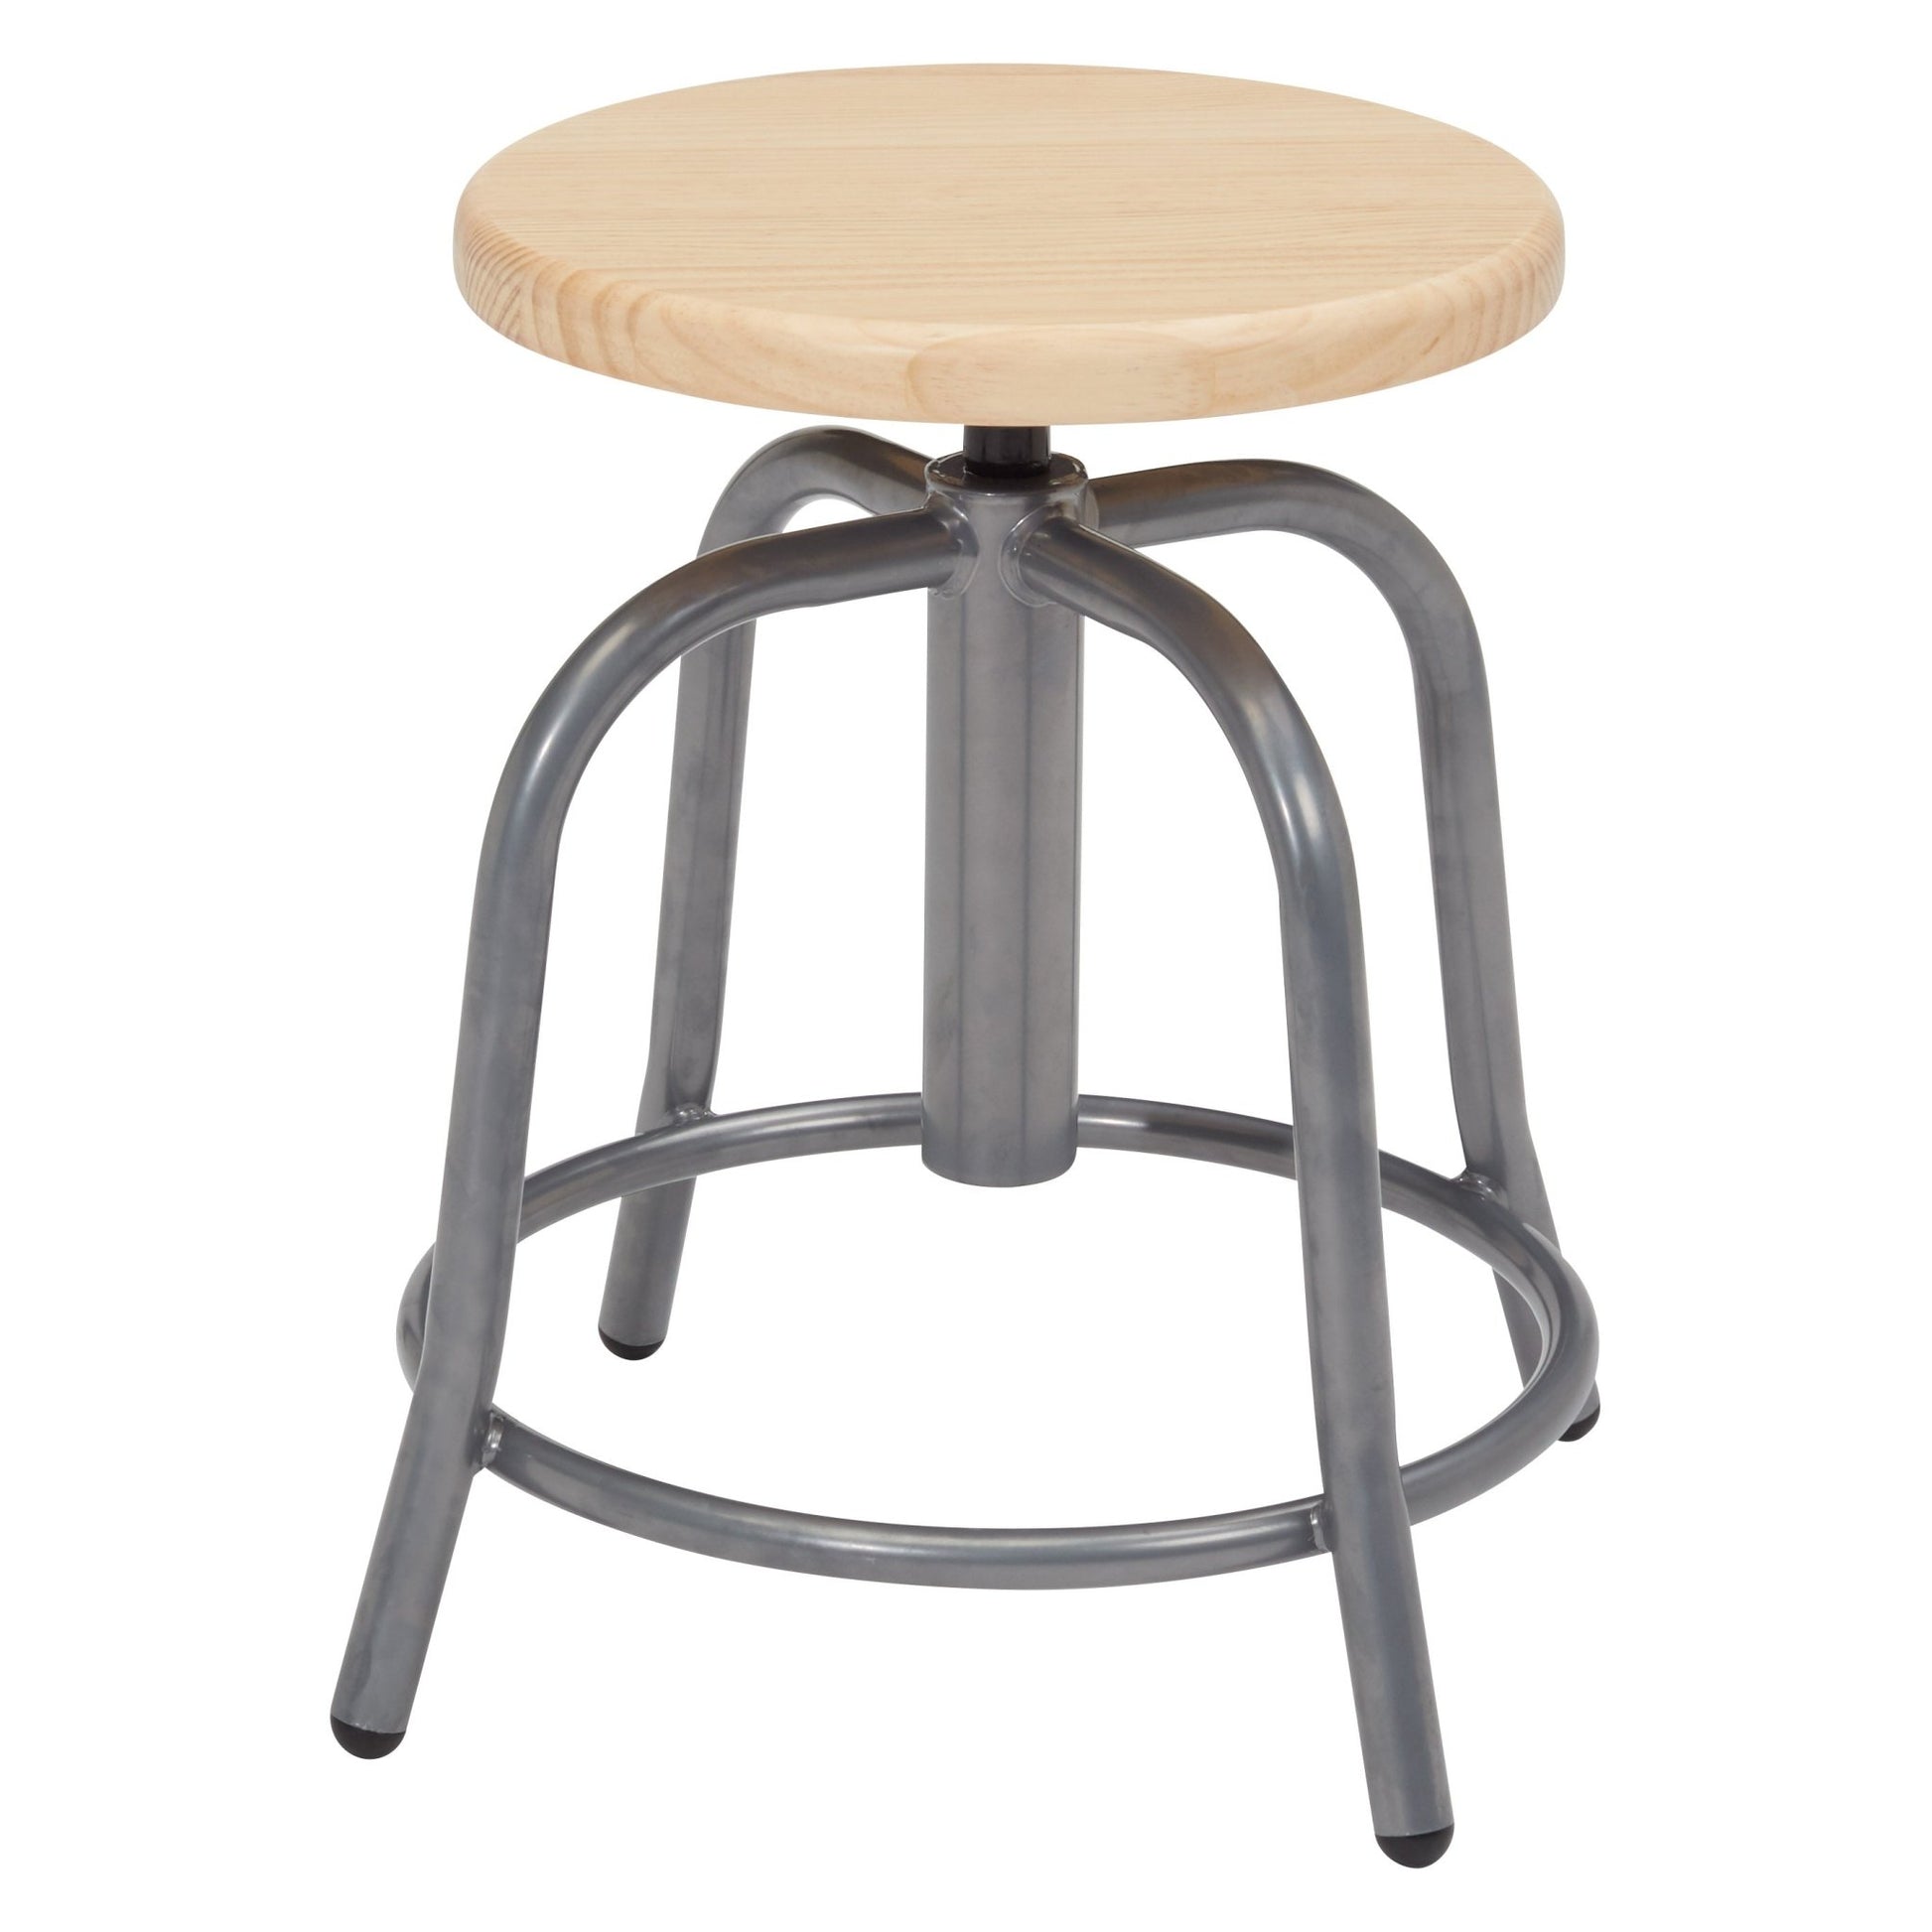 NPS 6800 Series 19" - 25" Height Adjustable Swivel Stool, Wooden Seat (National Public Seating NPS-6800W) - SchoolOutlet